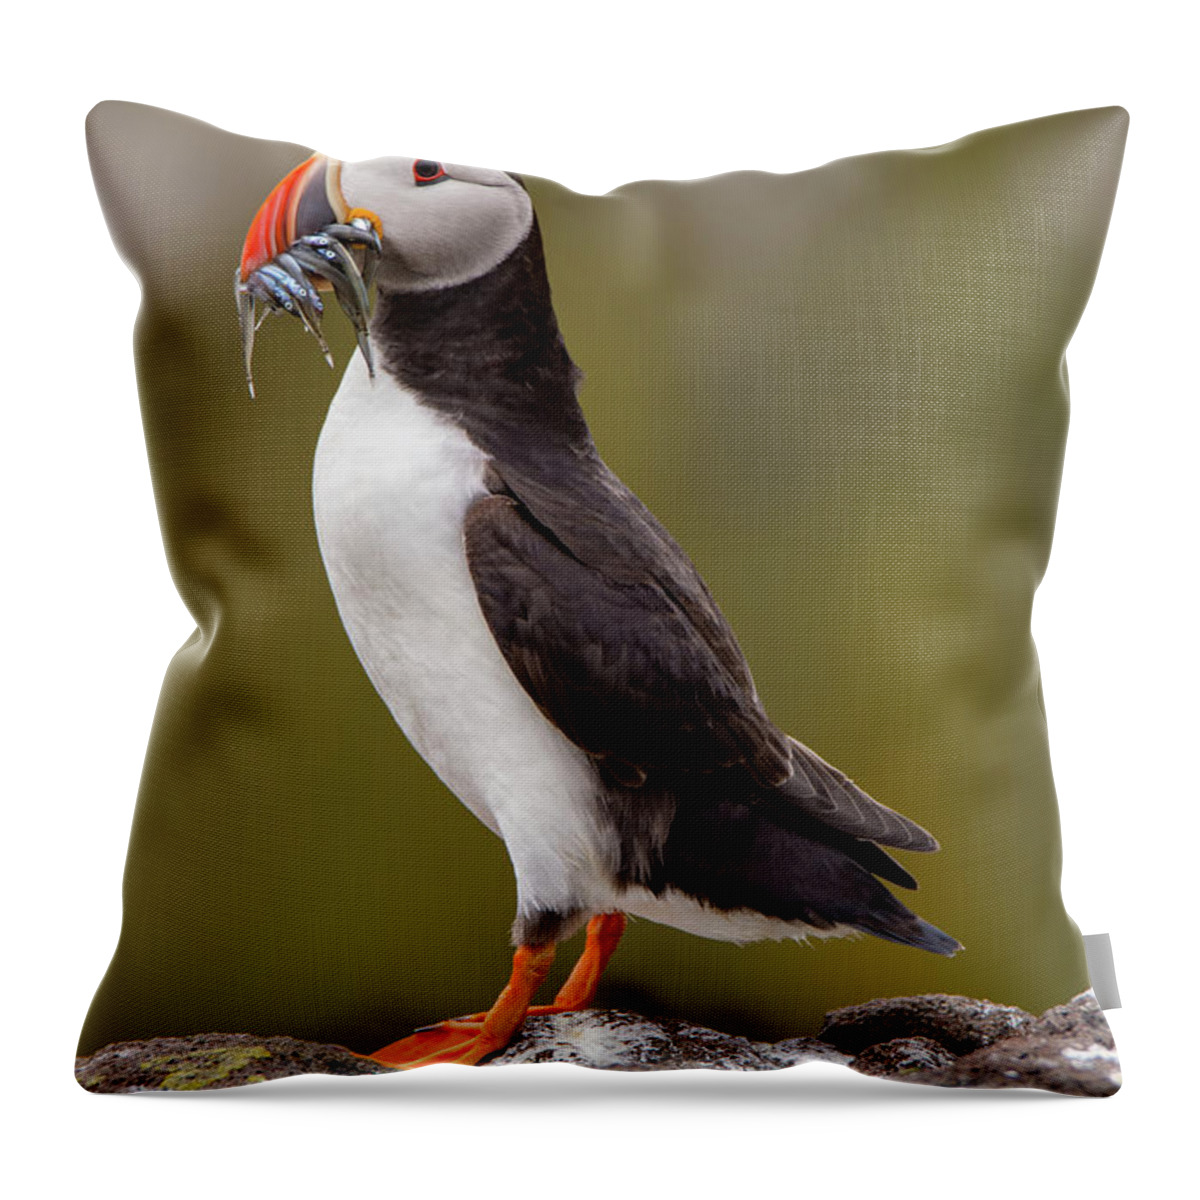 Puffin Throw Pillow featuring the photograph May Puffin by Kuni Photography